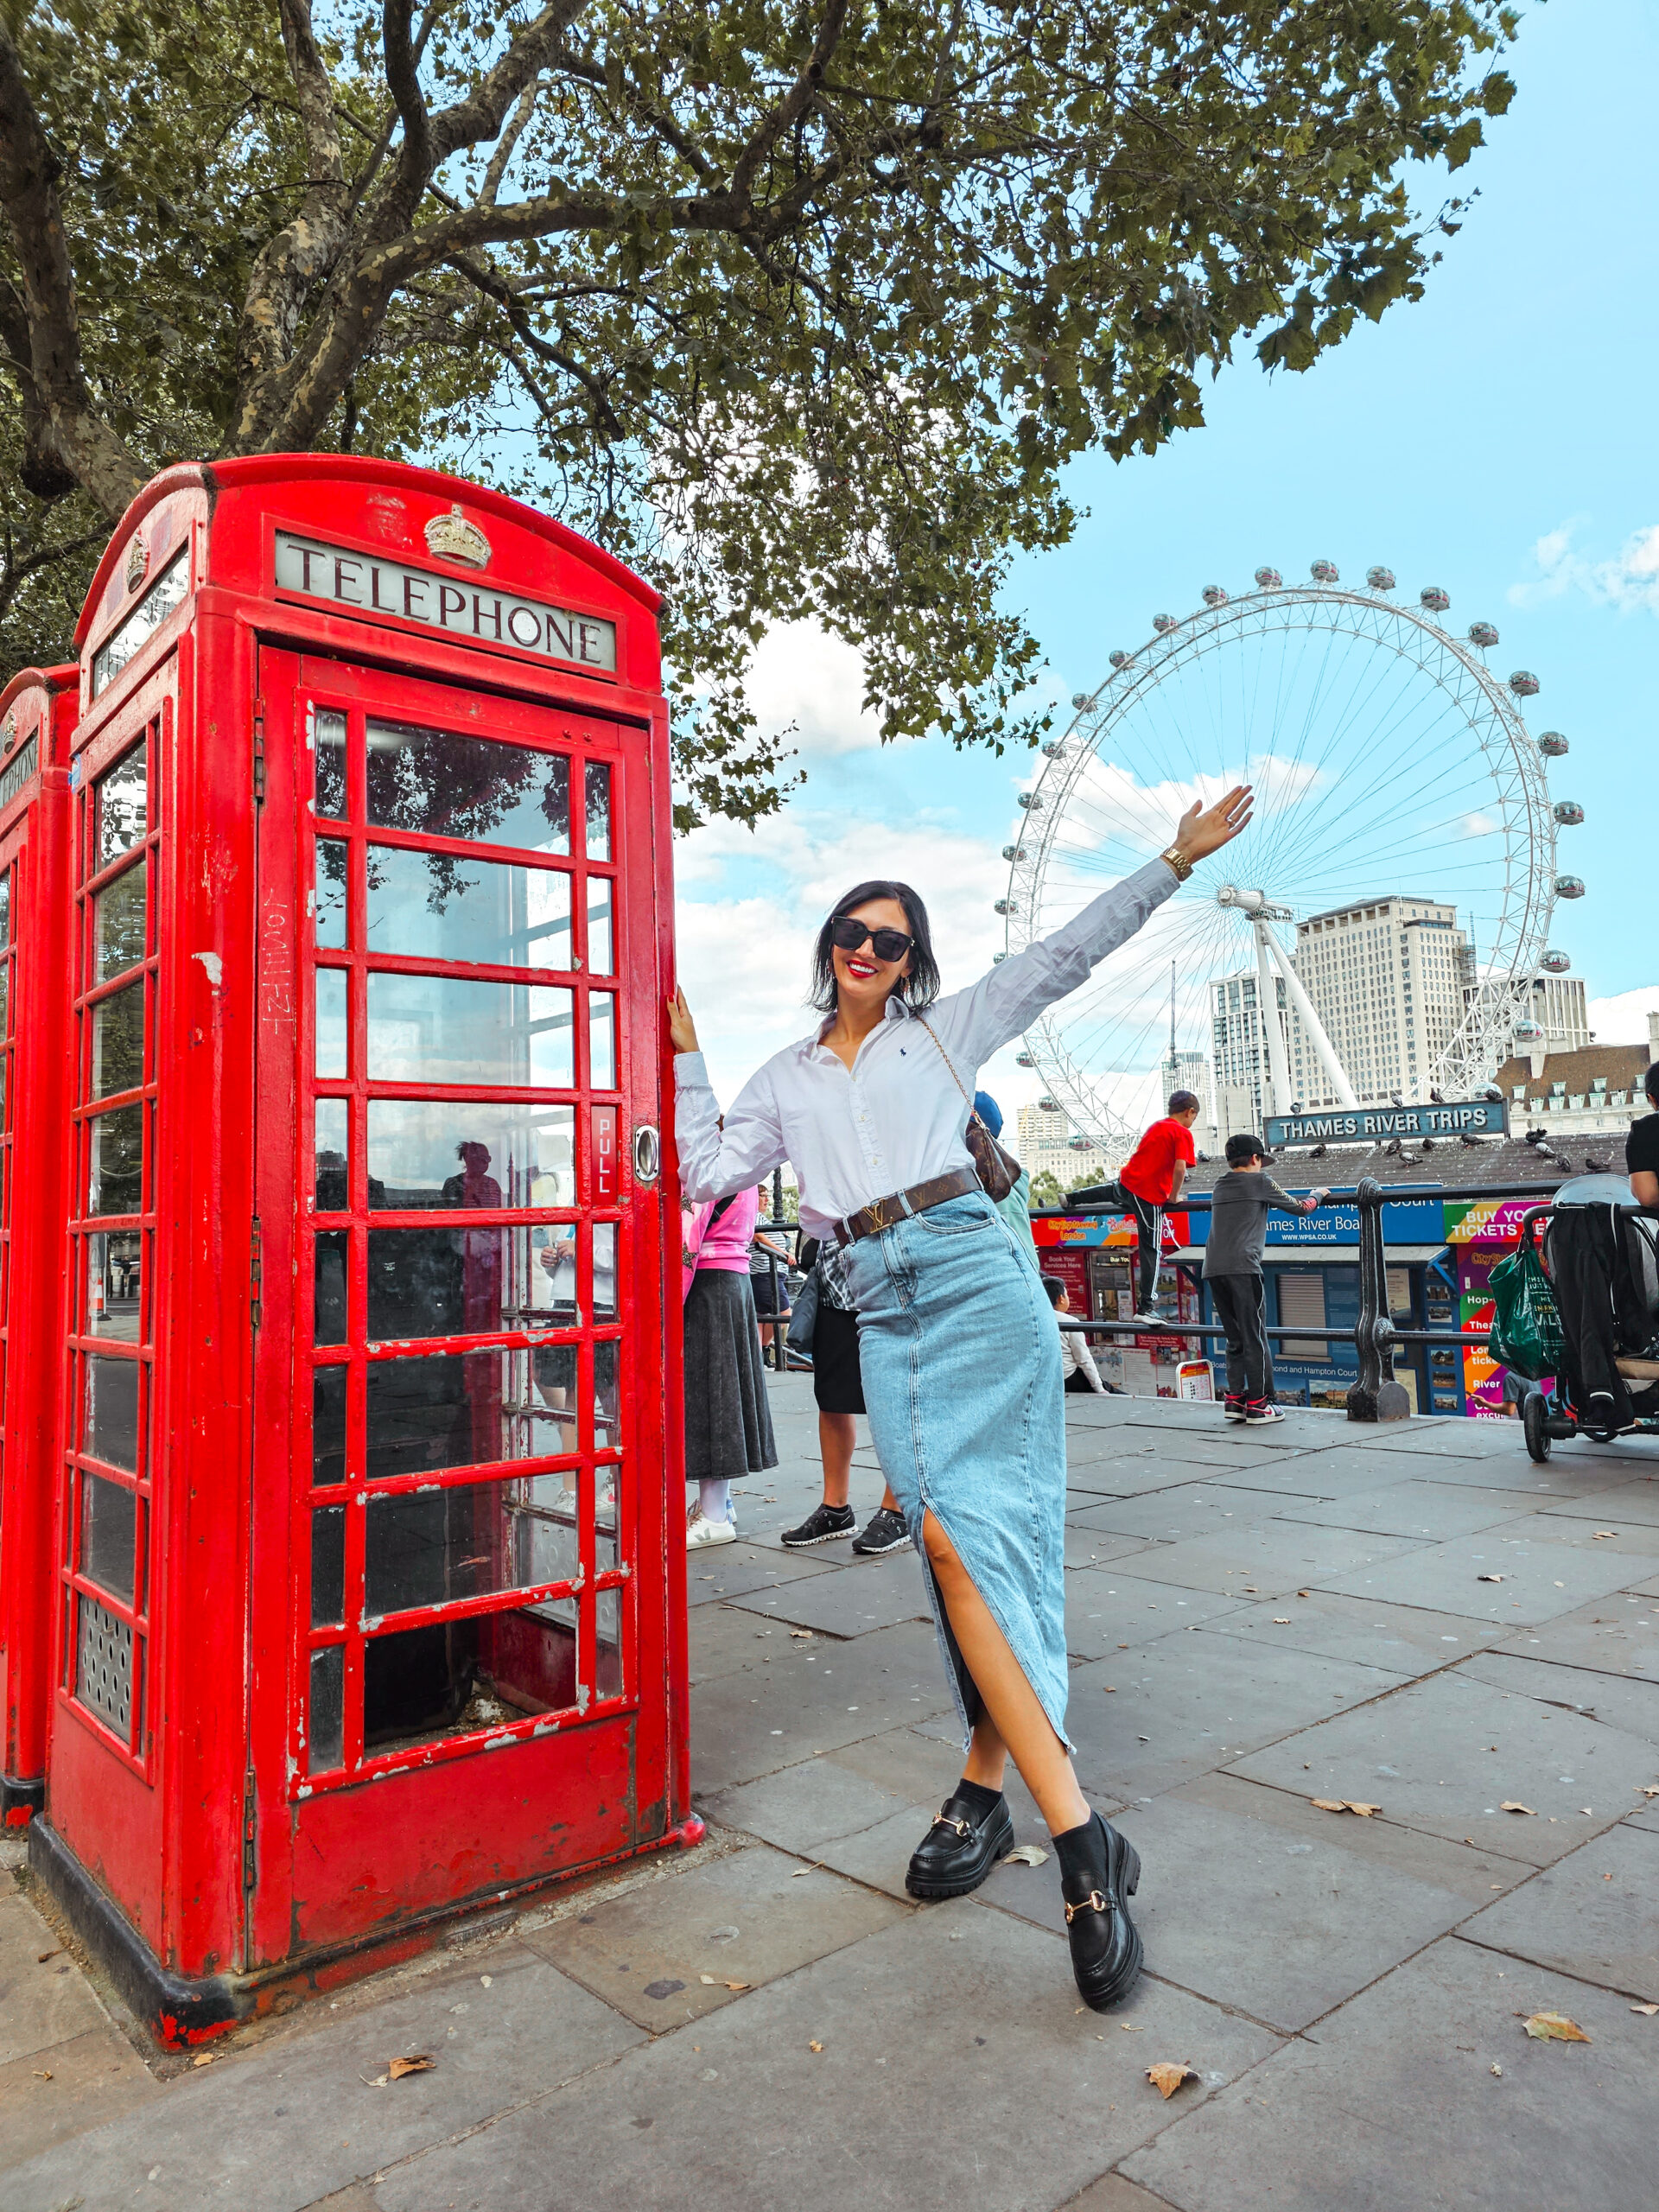 A Taylor Swift Guide to London – Ultimate Swifties Locations